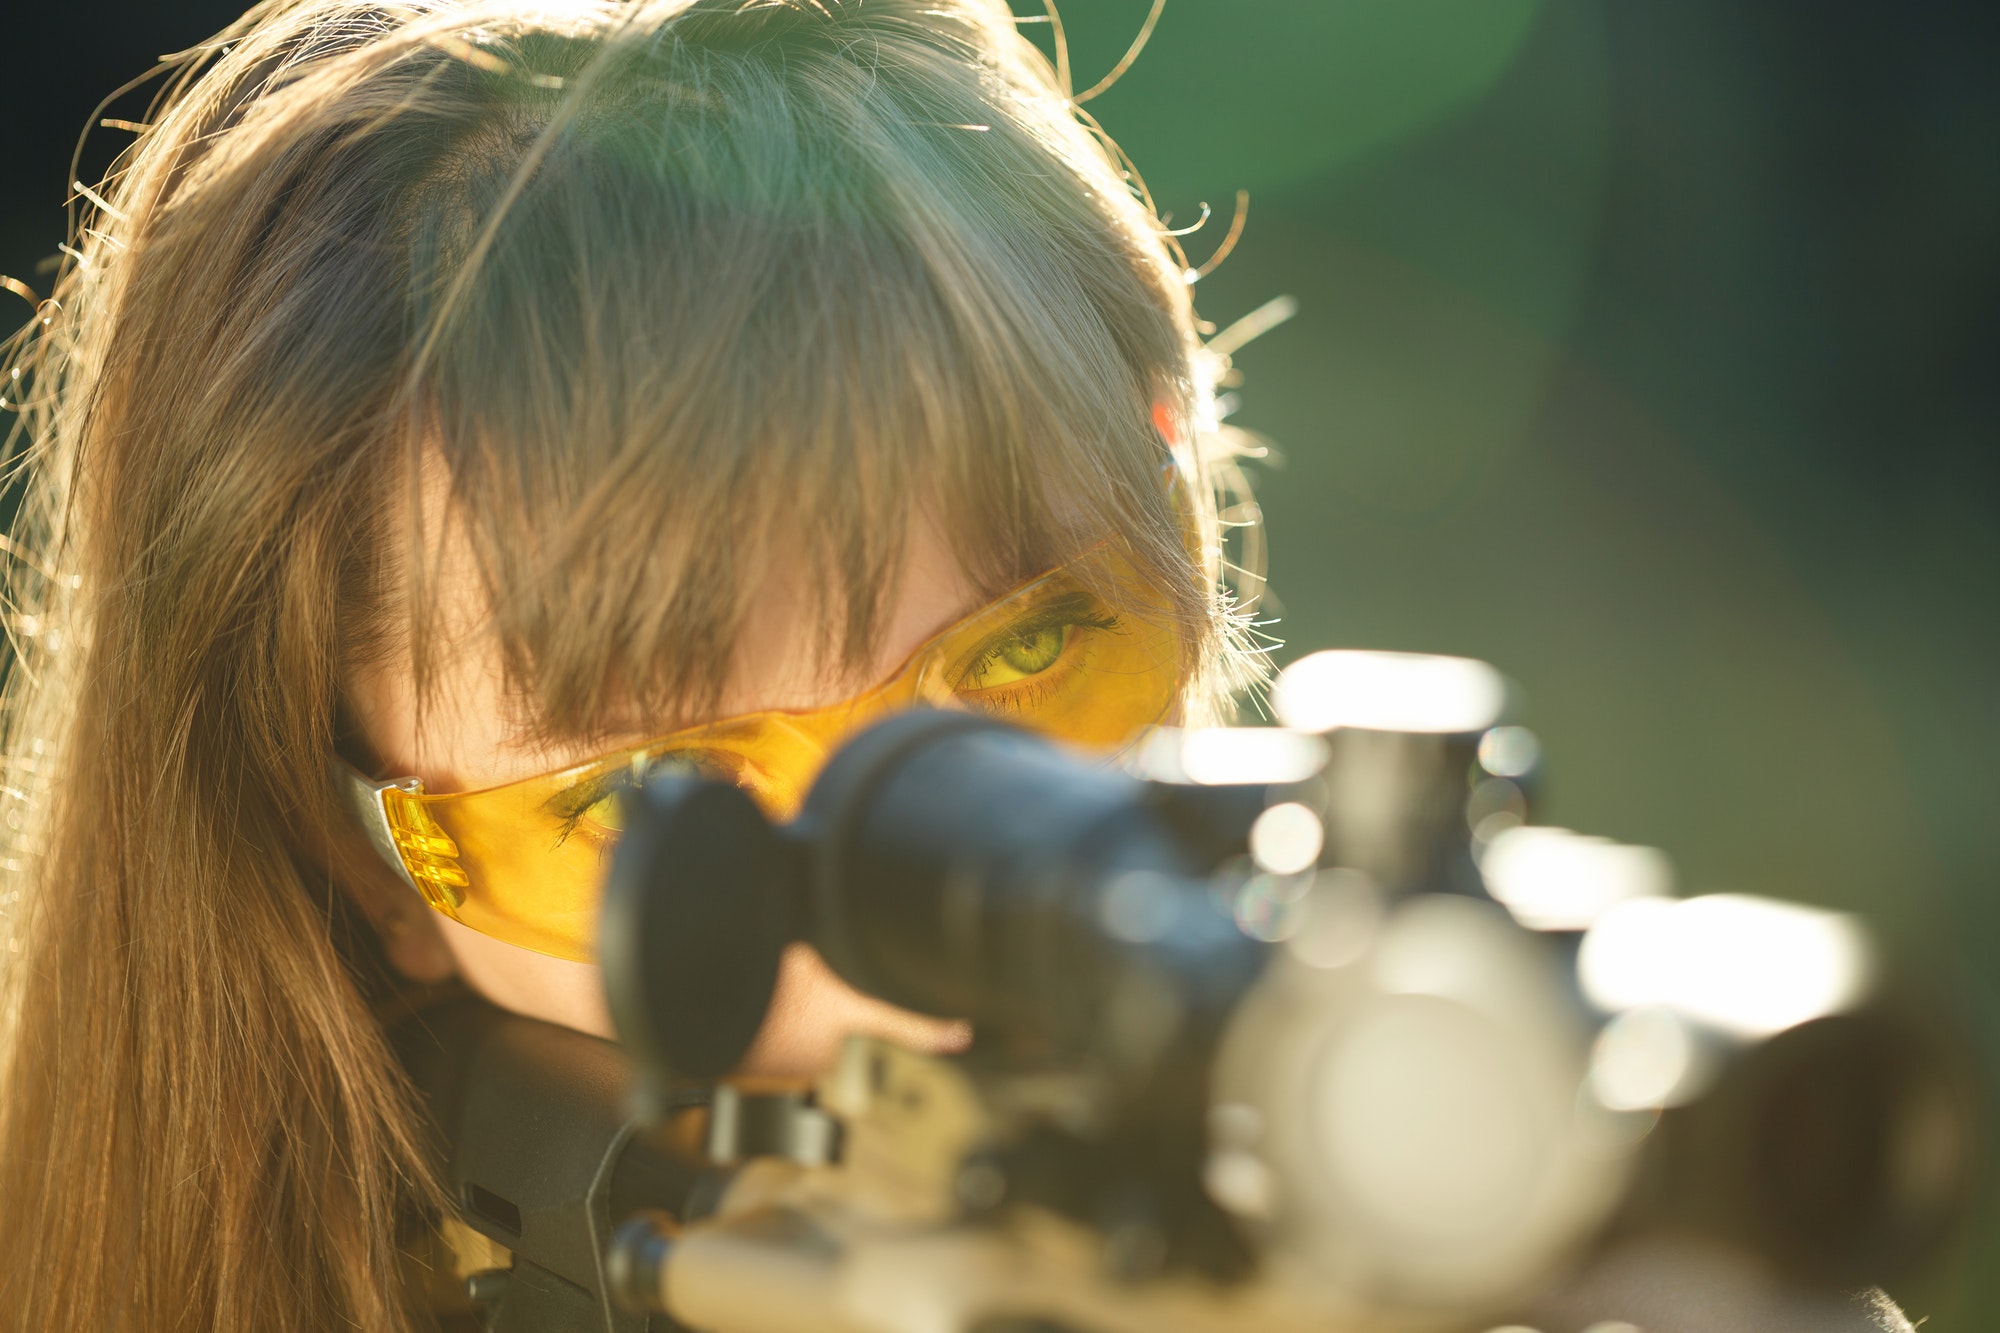 Girl with a gun for trap shooting and shooting glasses aiming at